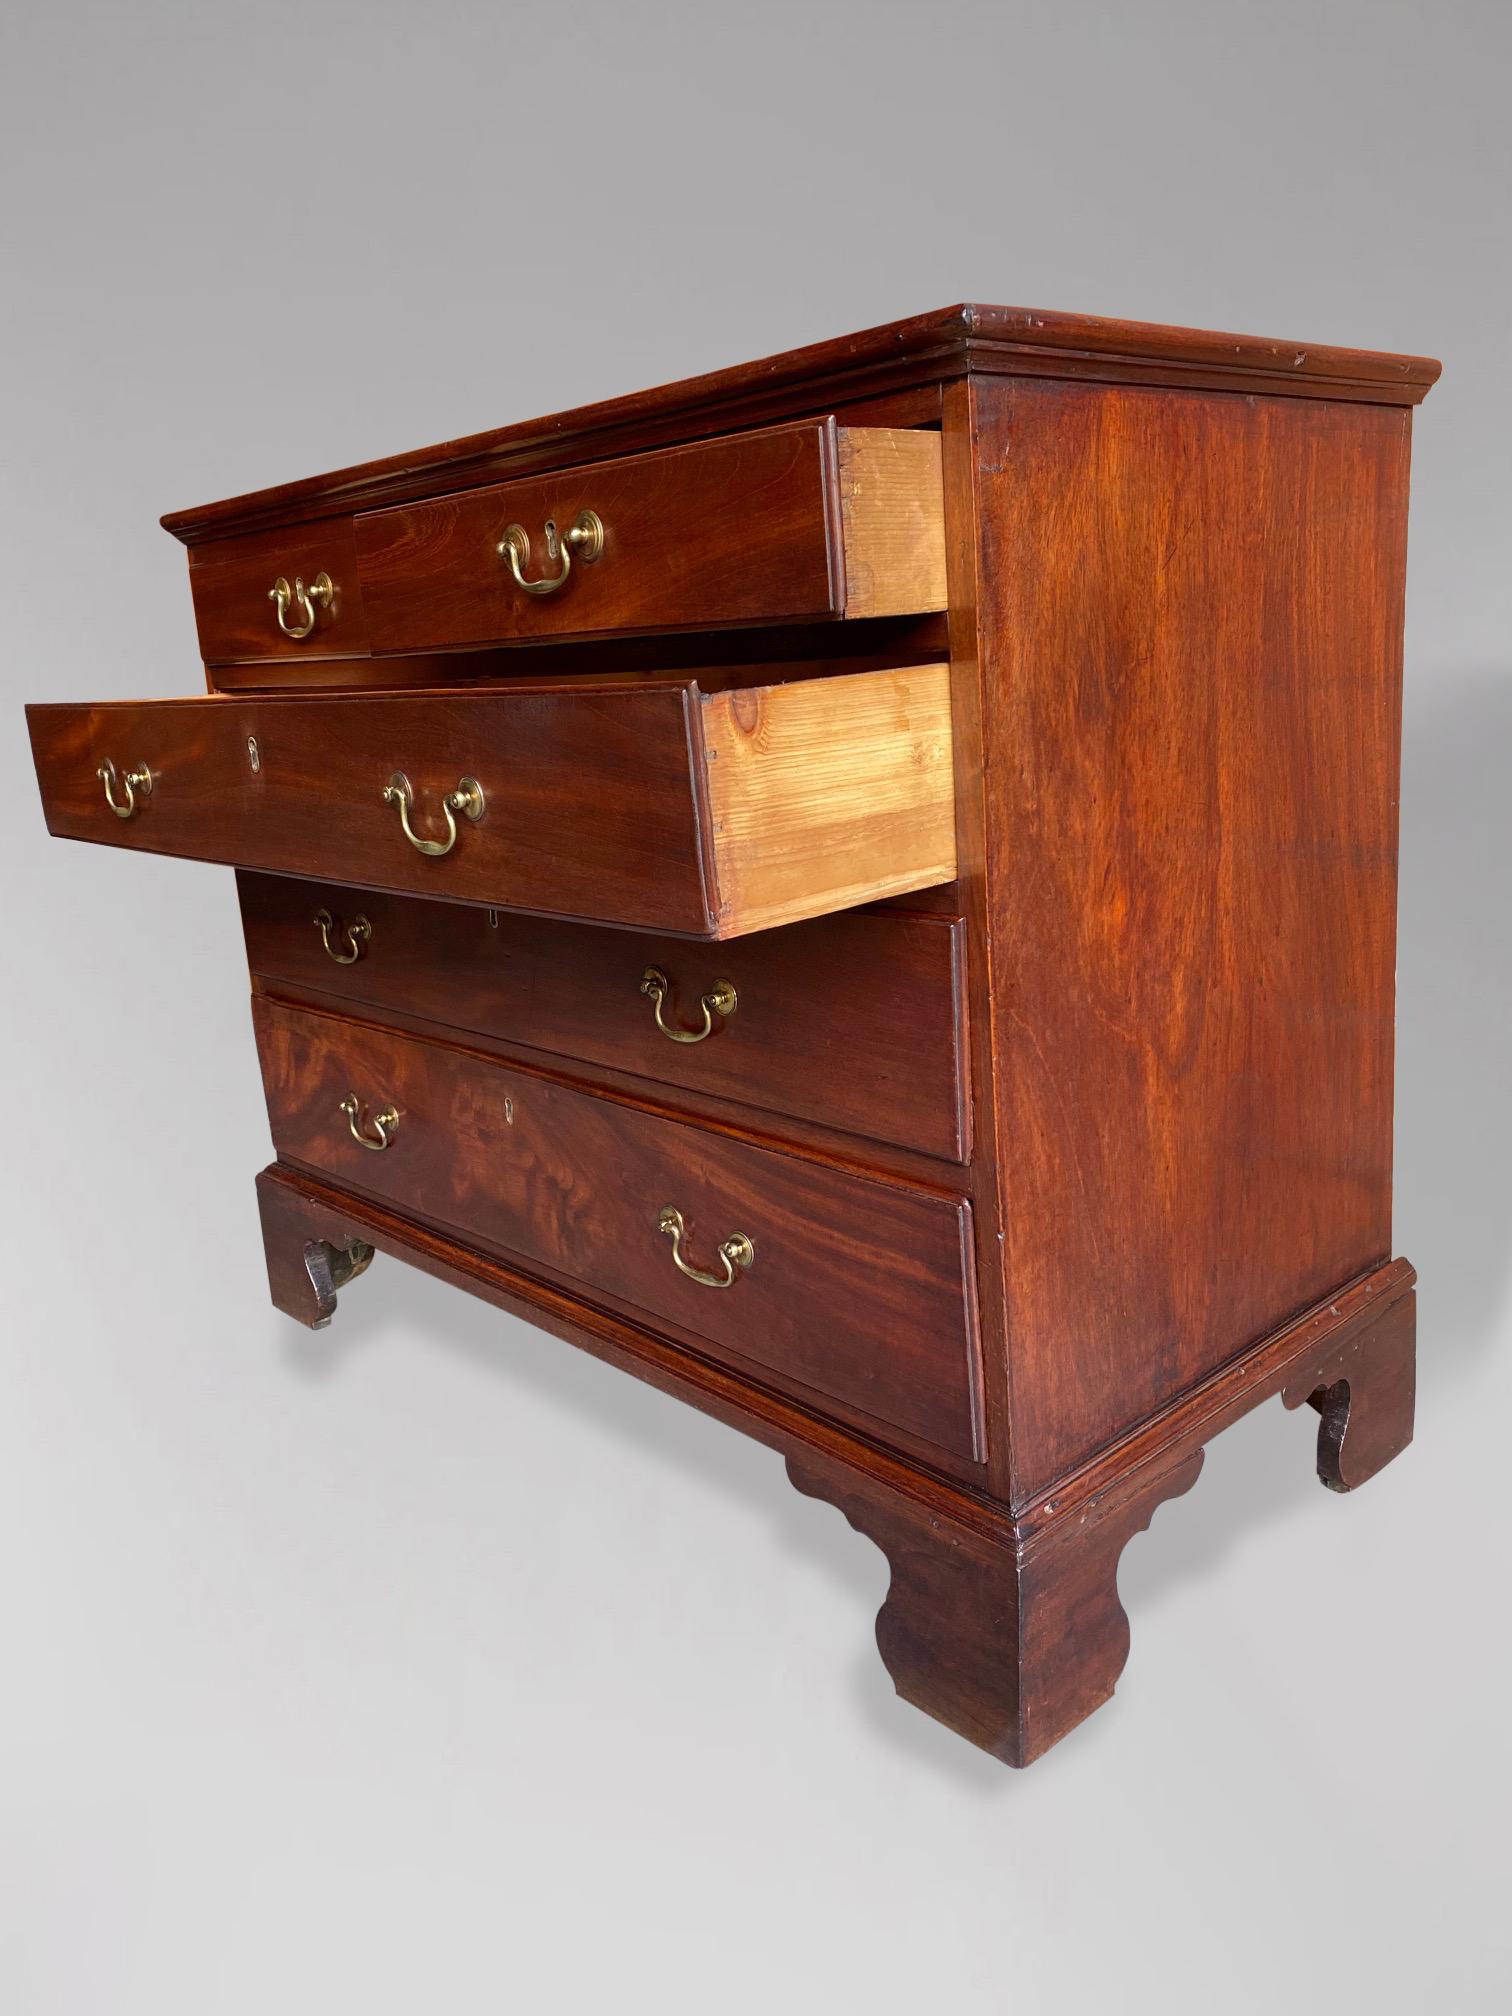 18th Century George III Period Mahogany Chest of Drawers In Good Condition For Sale In Petworth,West Sussex, GB